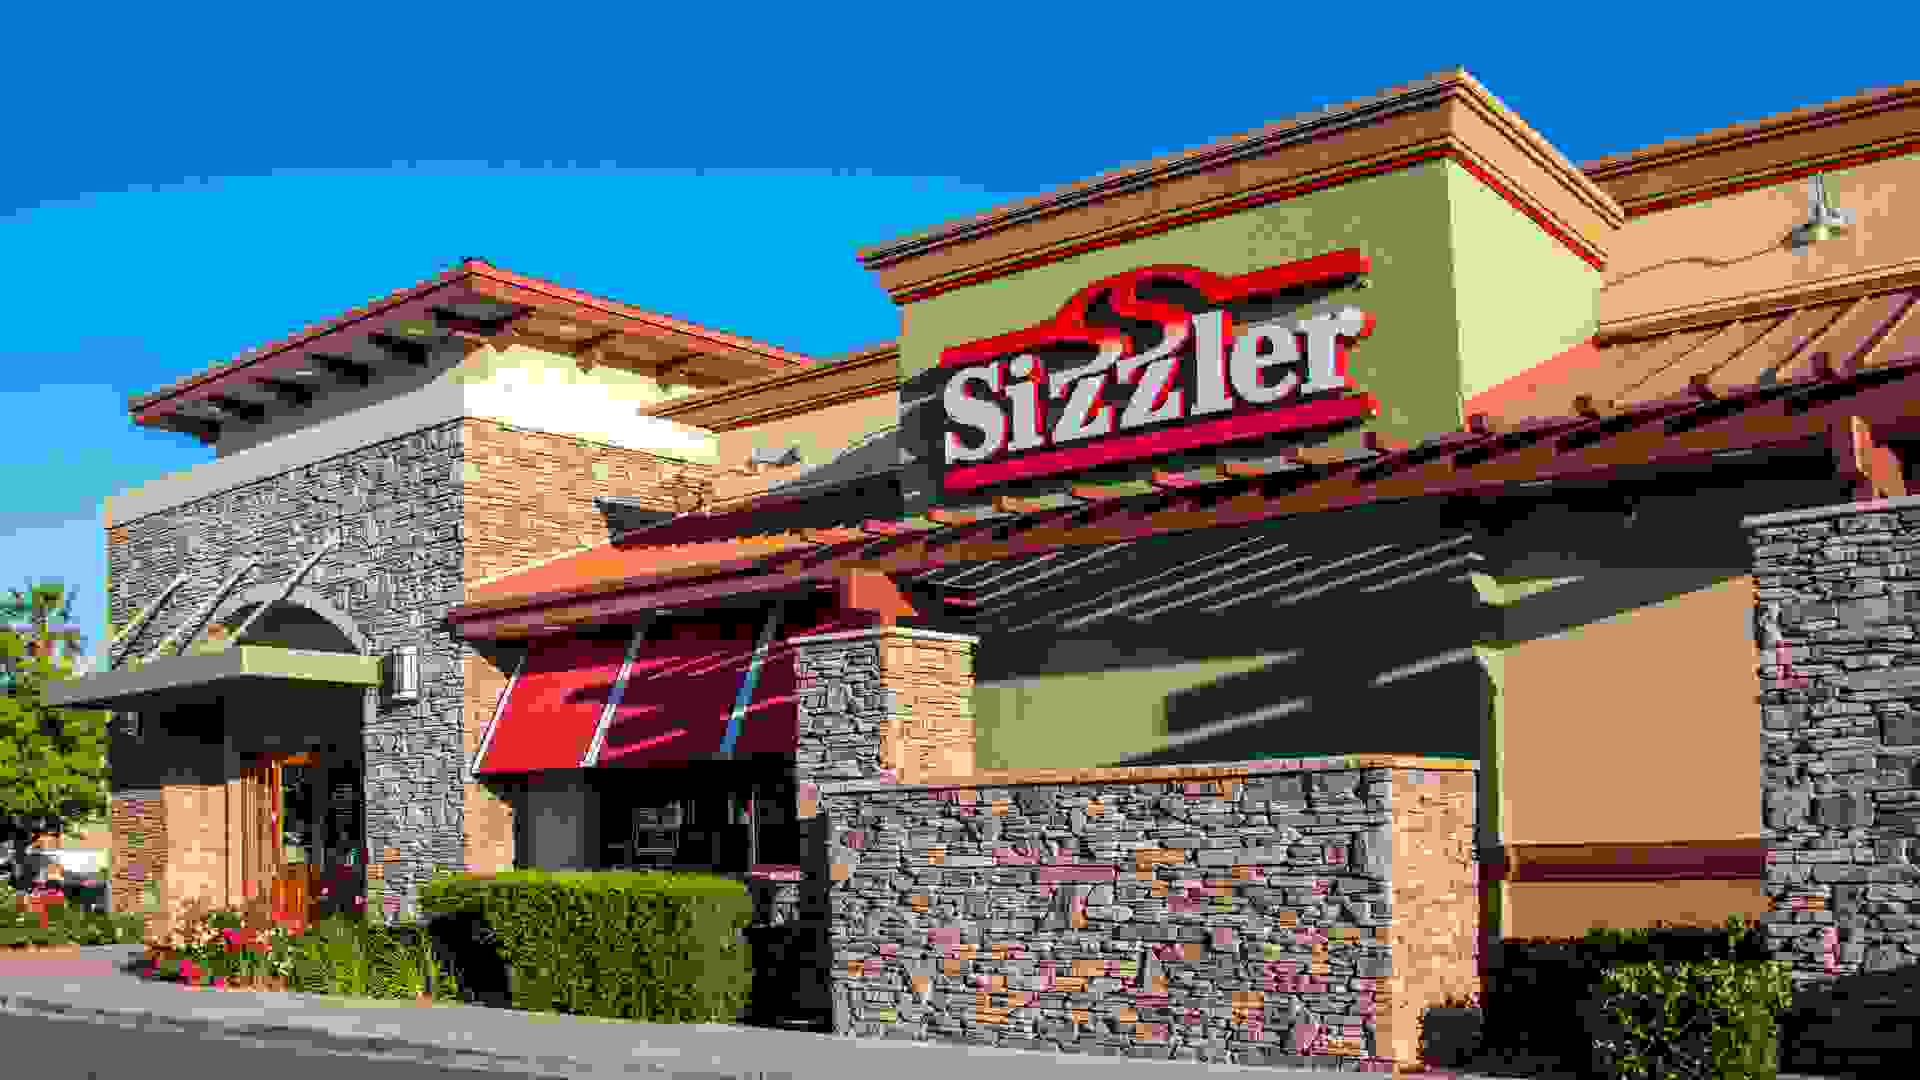 Sacramento, CA/USA 06/06/2019 Sizzler's american steak house and salad buffet front building sign and logo